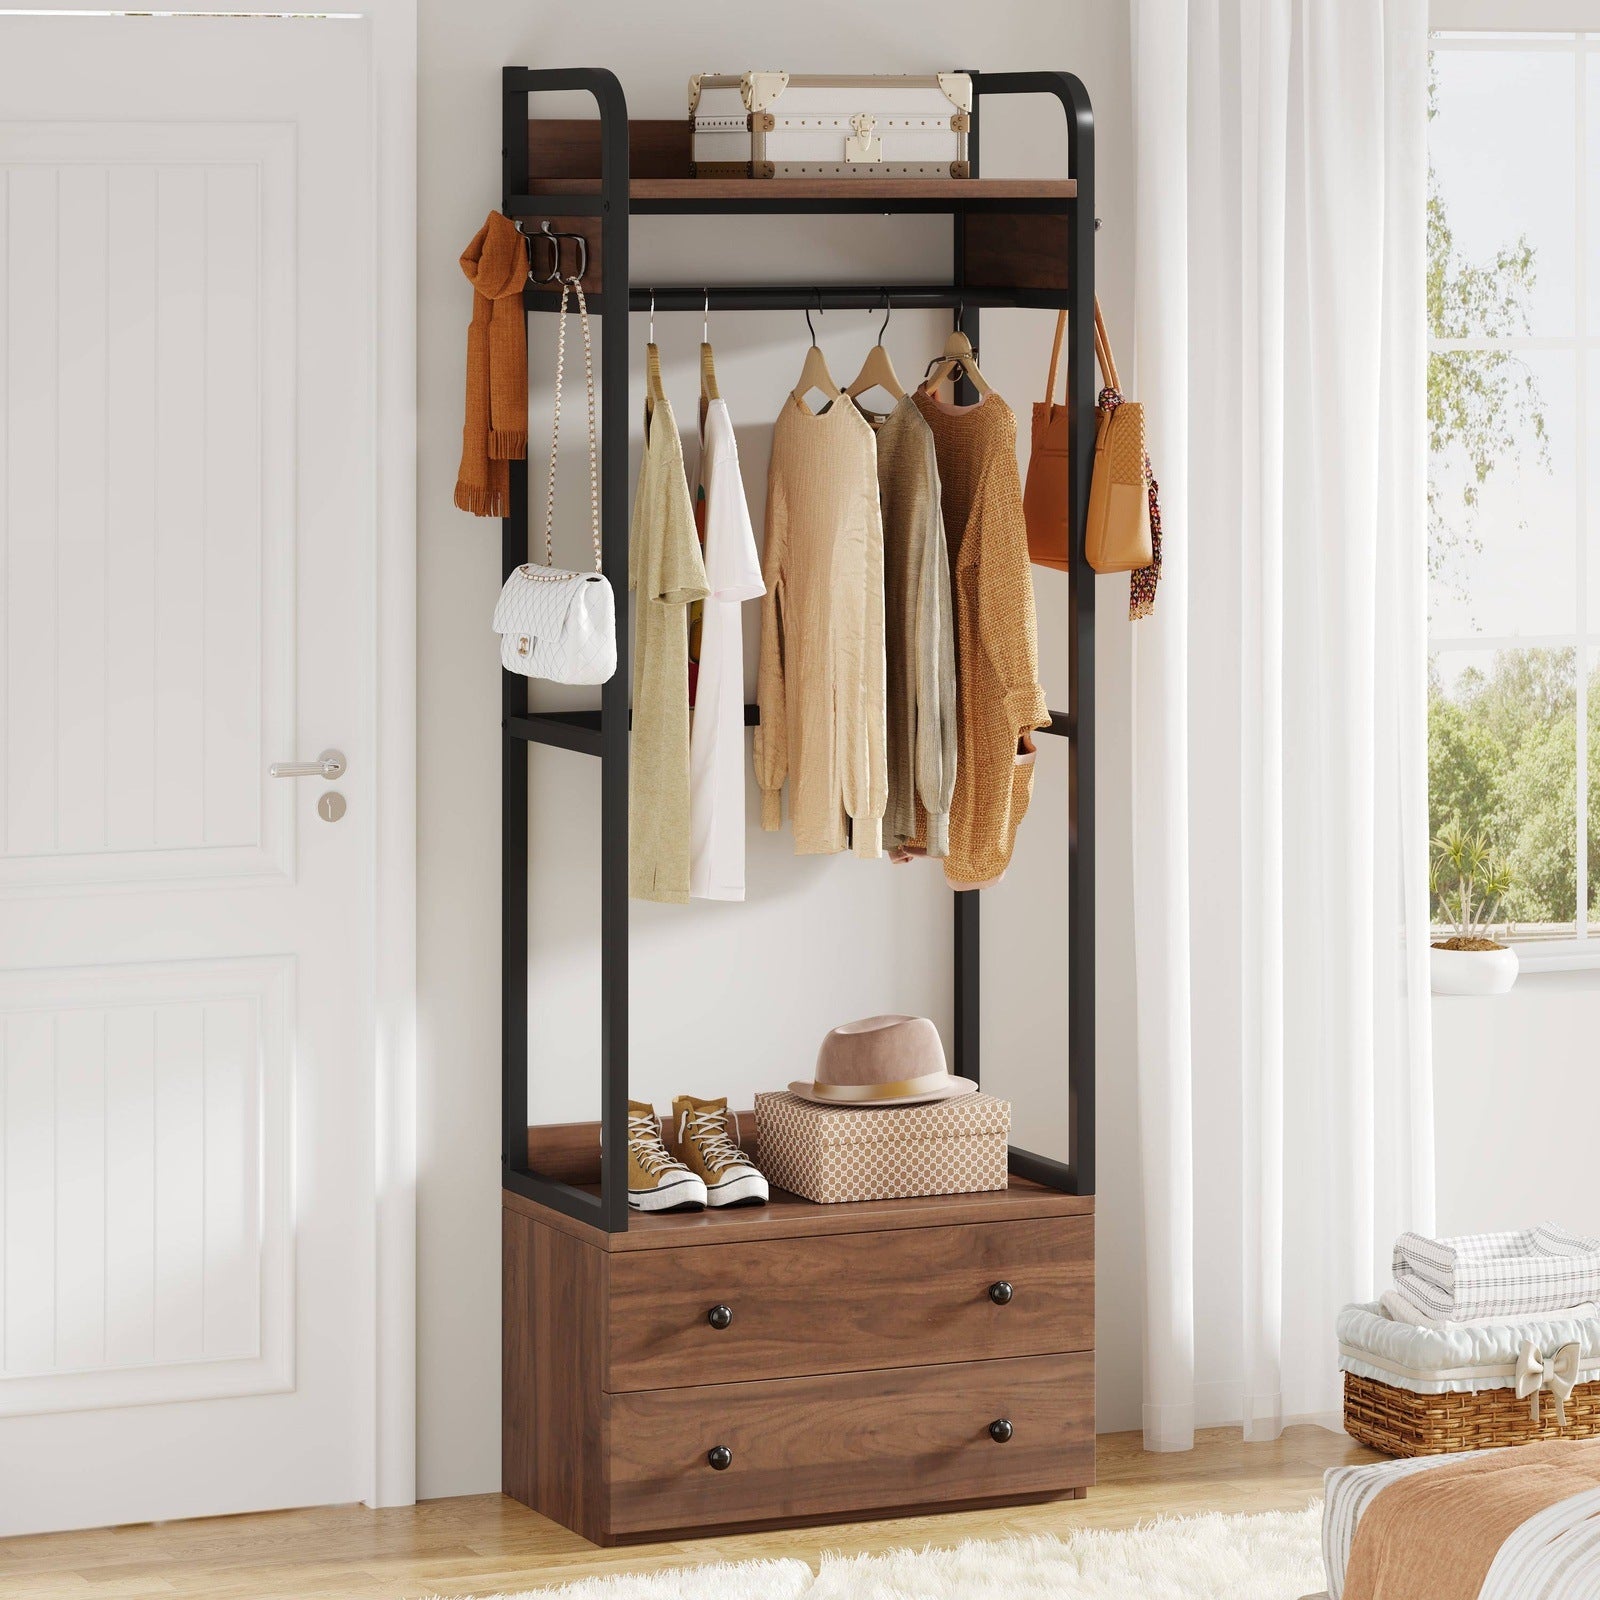 Free Standing Closet Organizer, Entryway Bench with Coat Rack freestanding,  Metal Garment Rack with 5 Hooks Shelves for Hanging Clothes and Storage,  Open Wardrobe Rack for Bedroom Living Room Entryway-Black